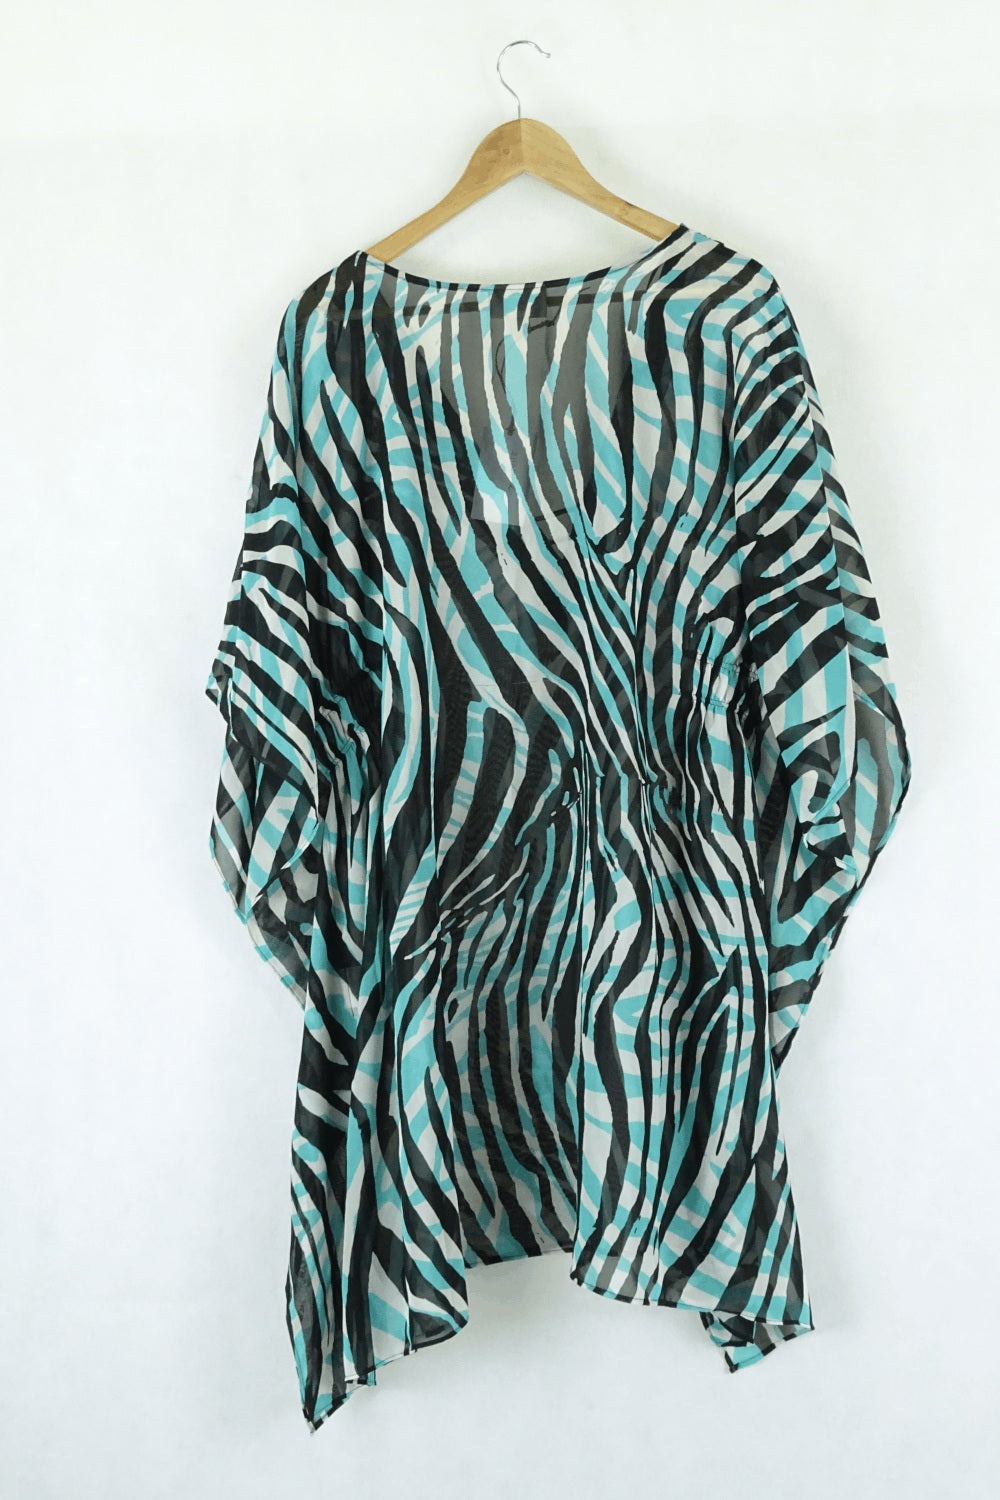 Autograph Black and Green Printed Sheer Blouse 14